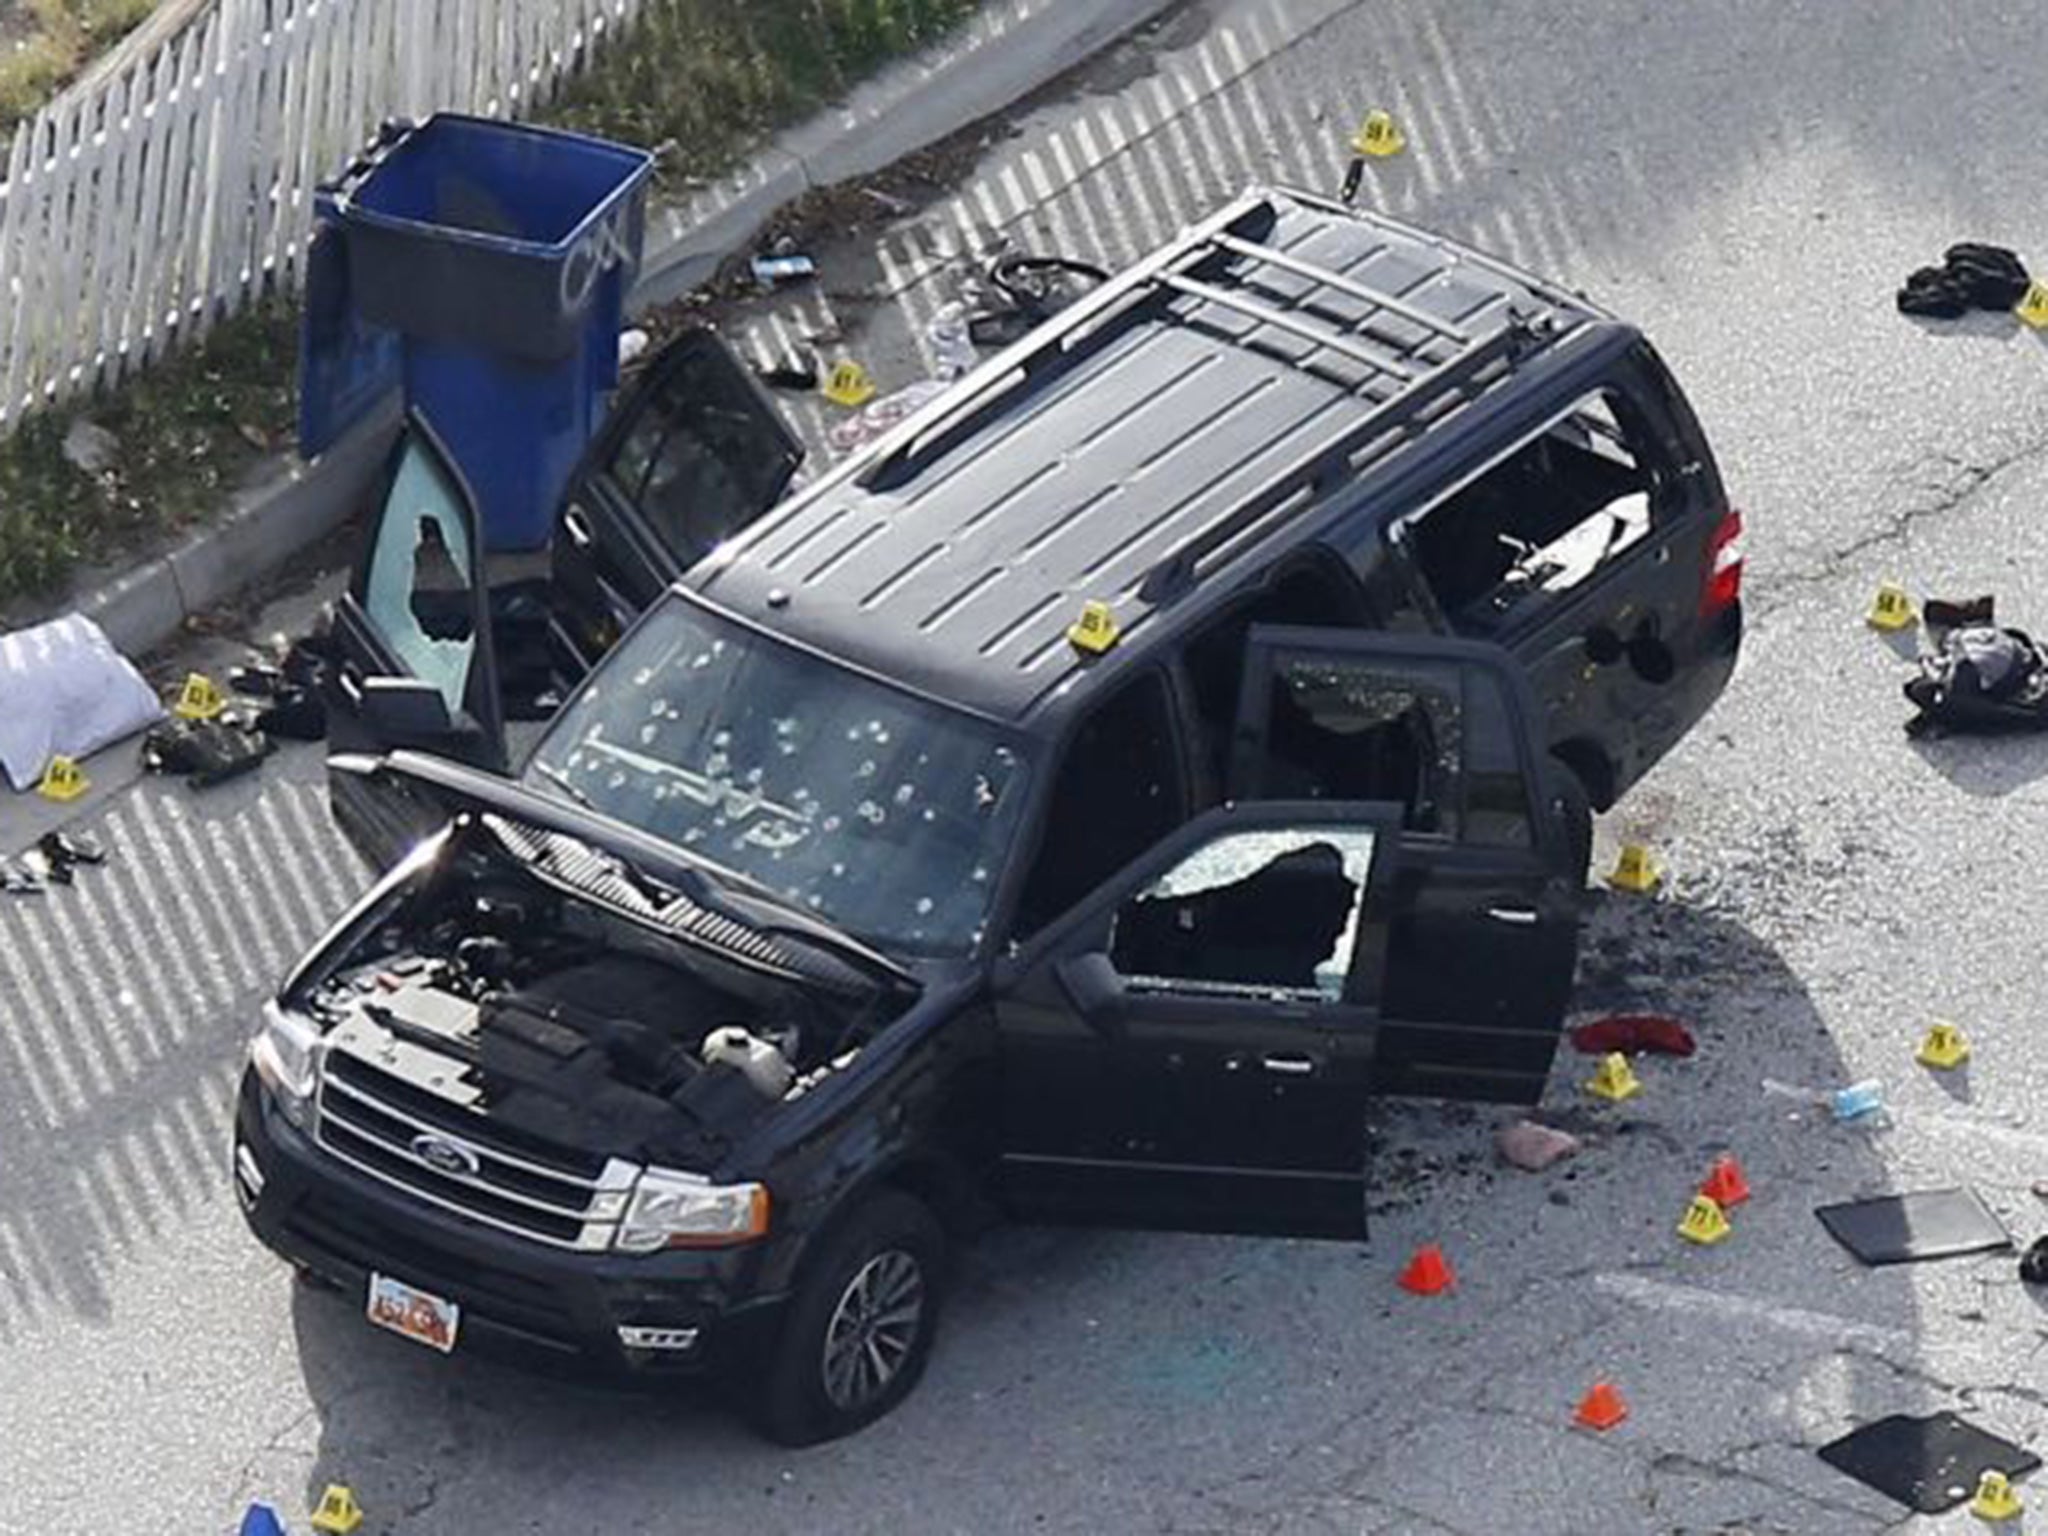 The vehicle used in the December 2014 attack; by late April, more people in San Bernardino had been shot dead in 2016 than were killed in the massacre